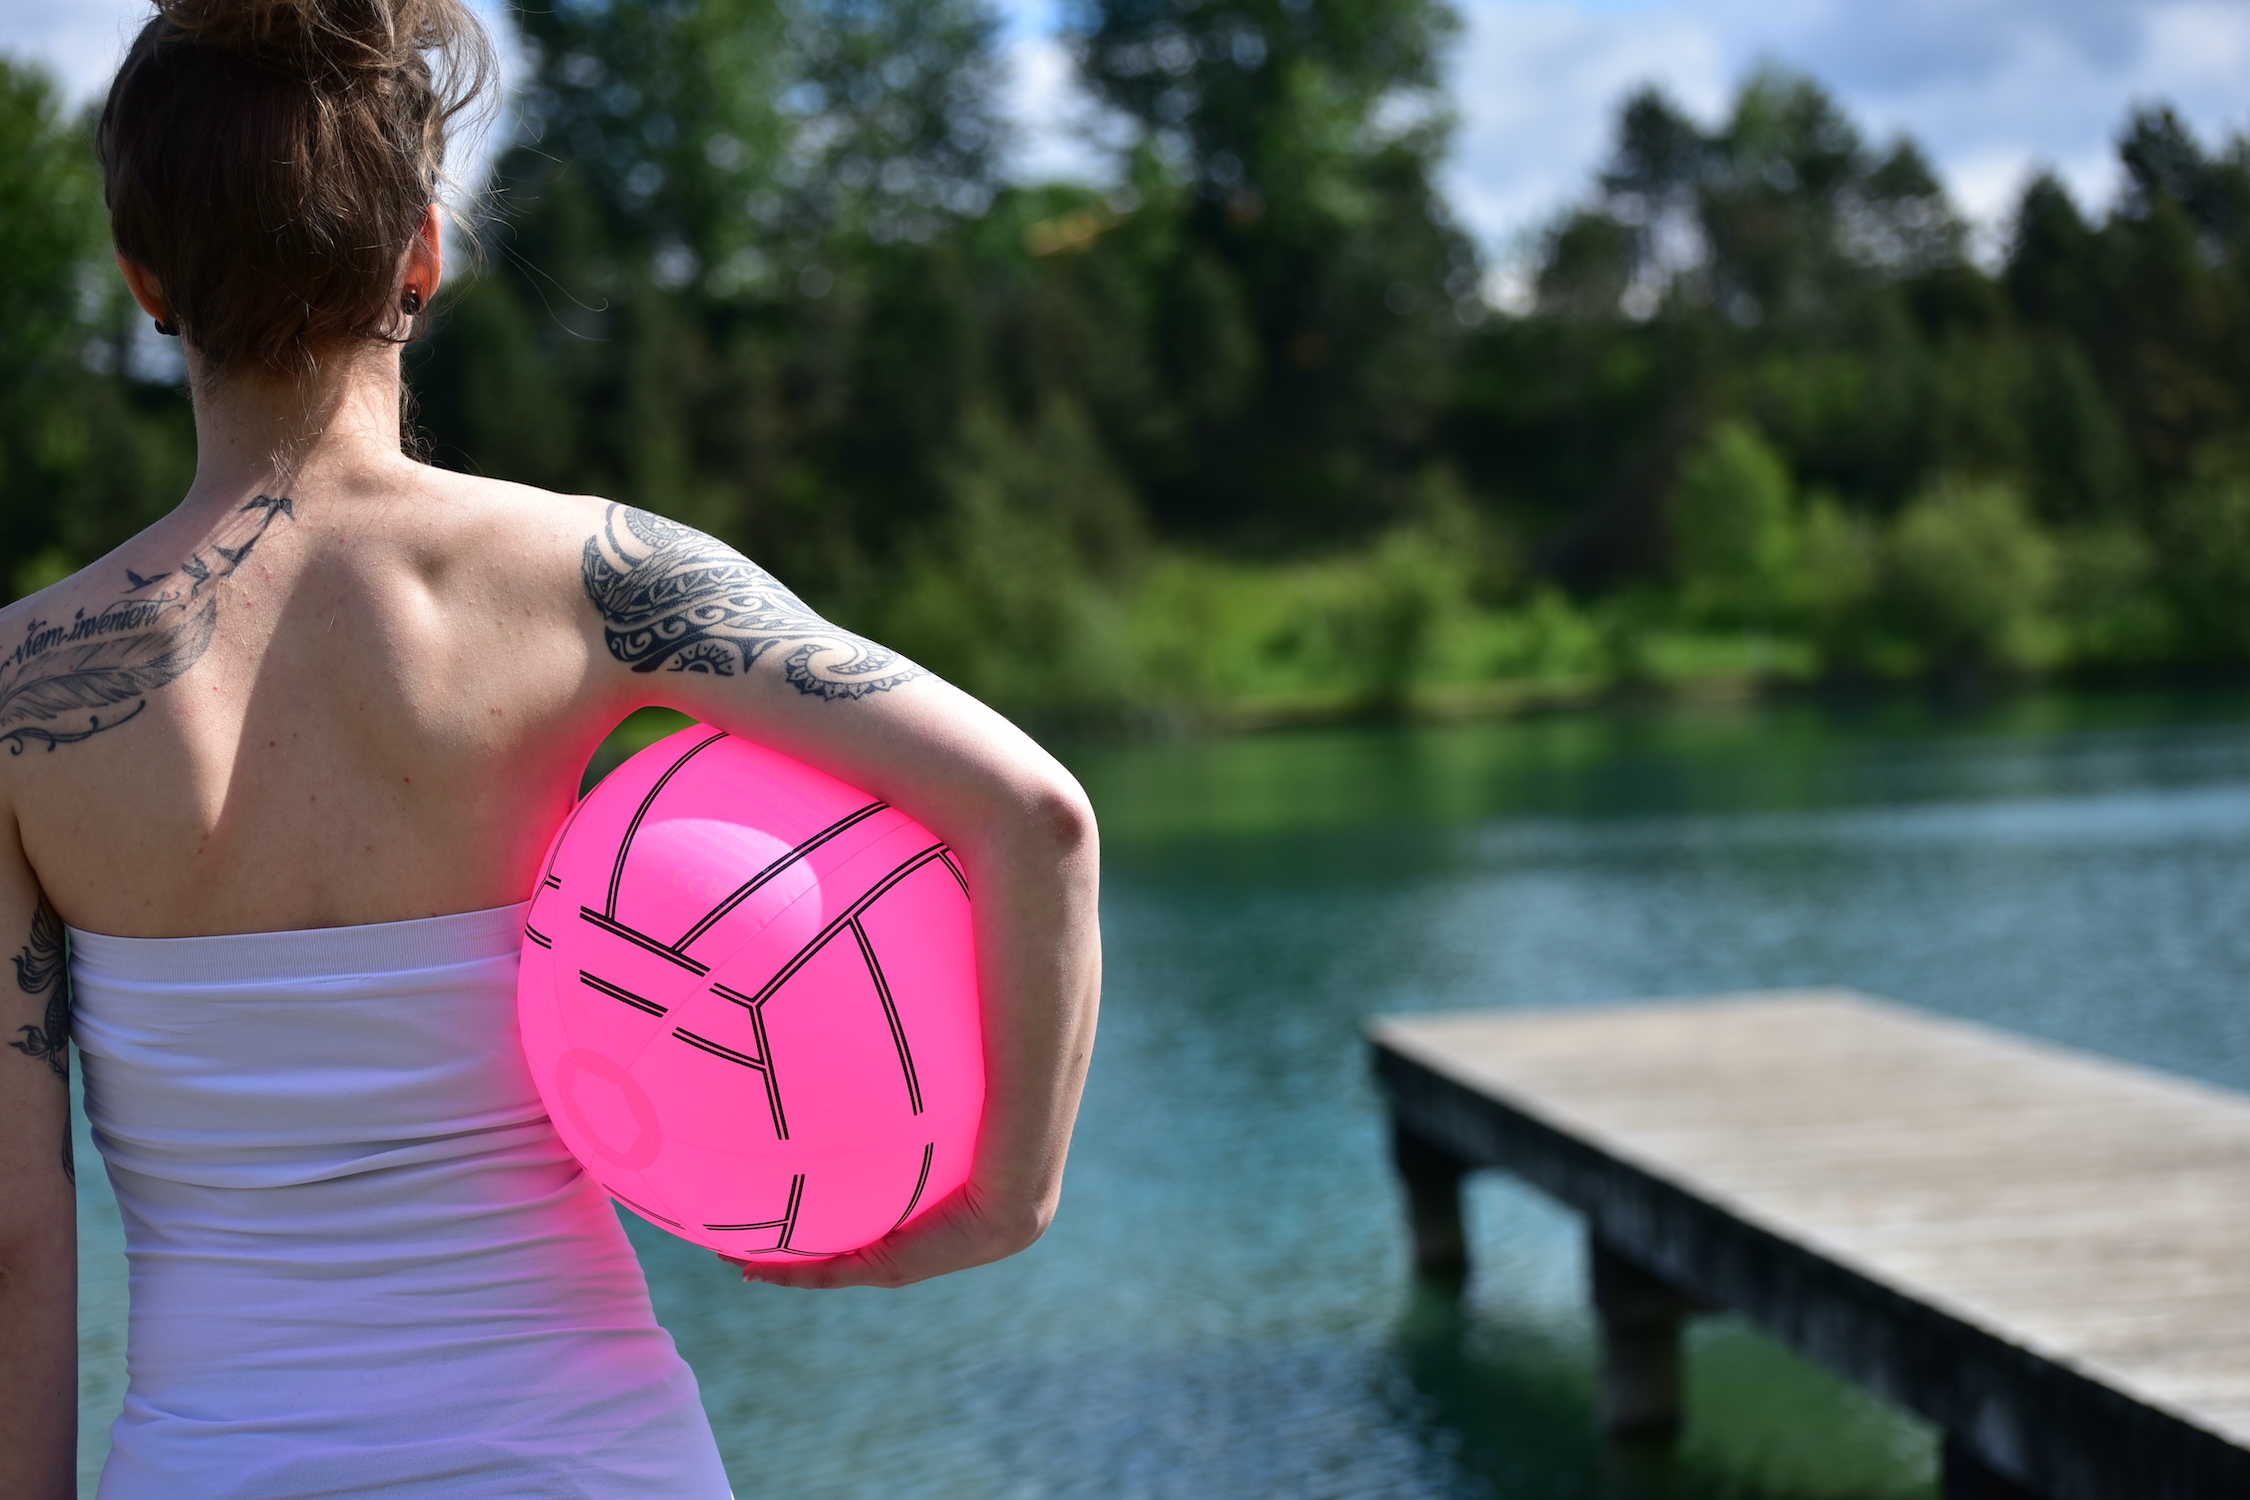 Girl holding a ball at the lake